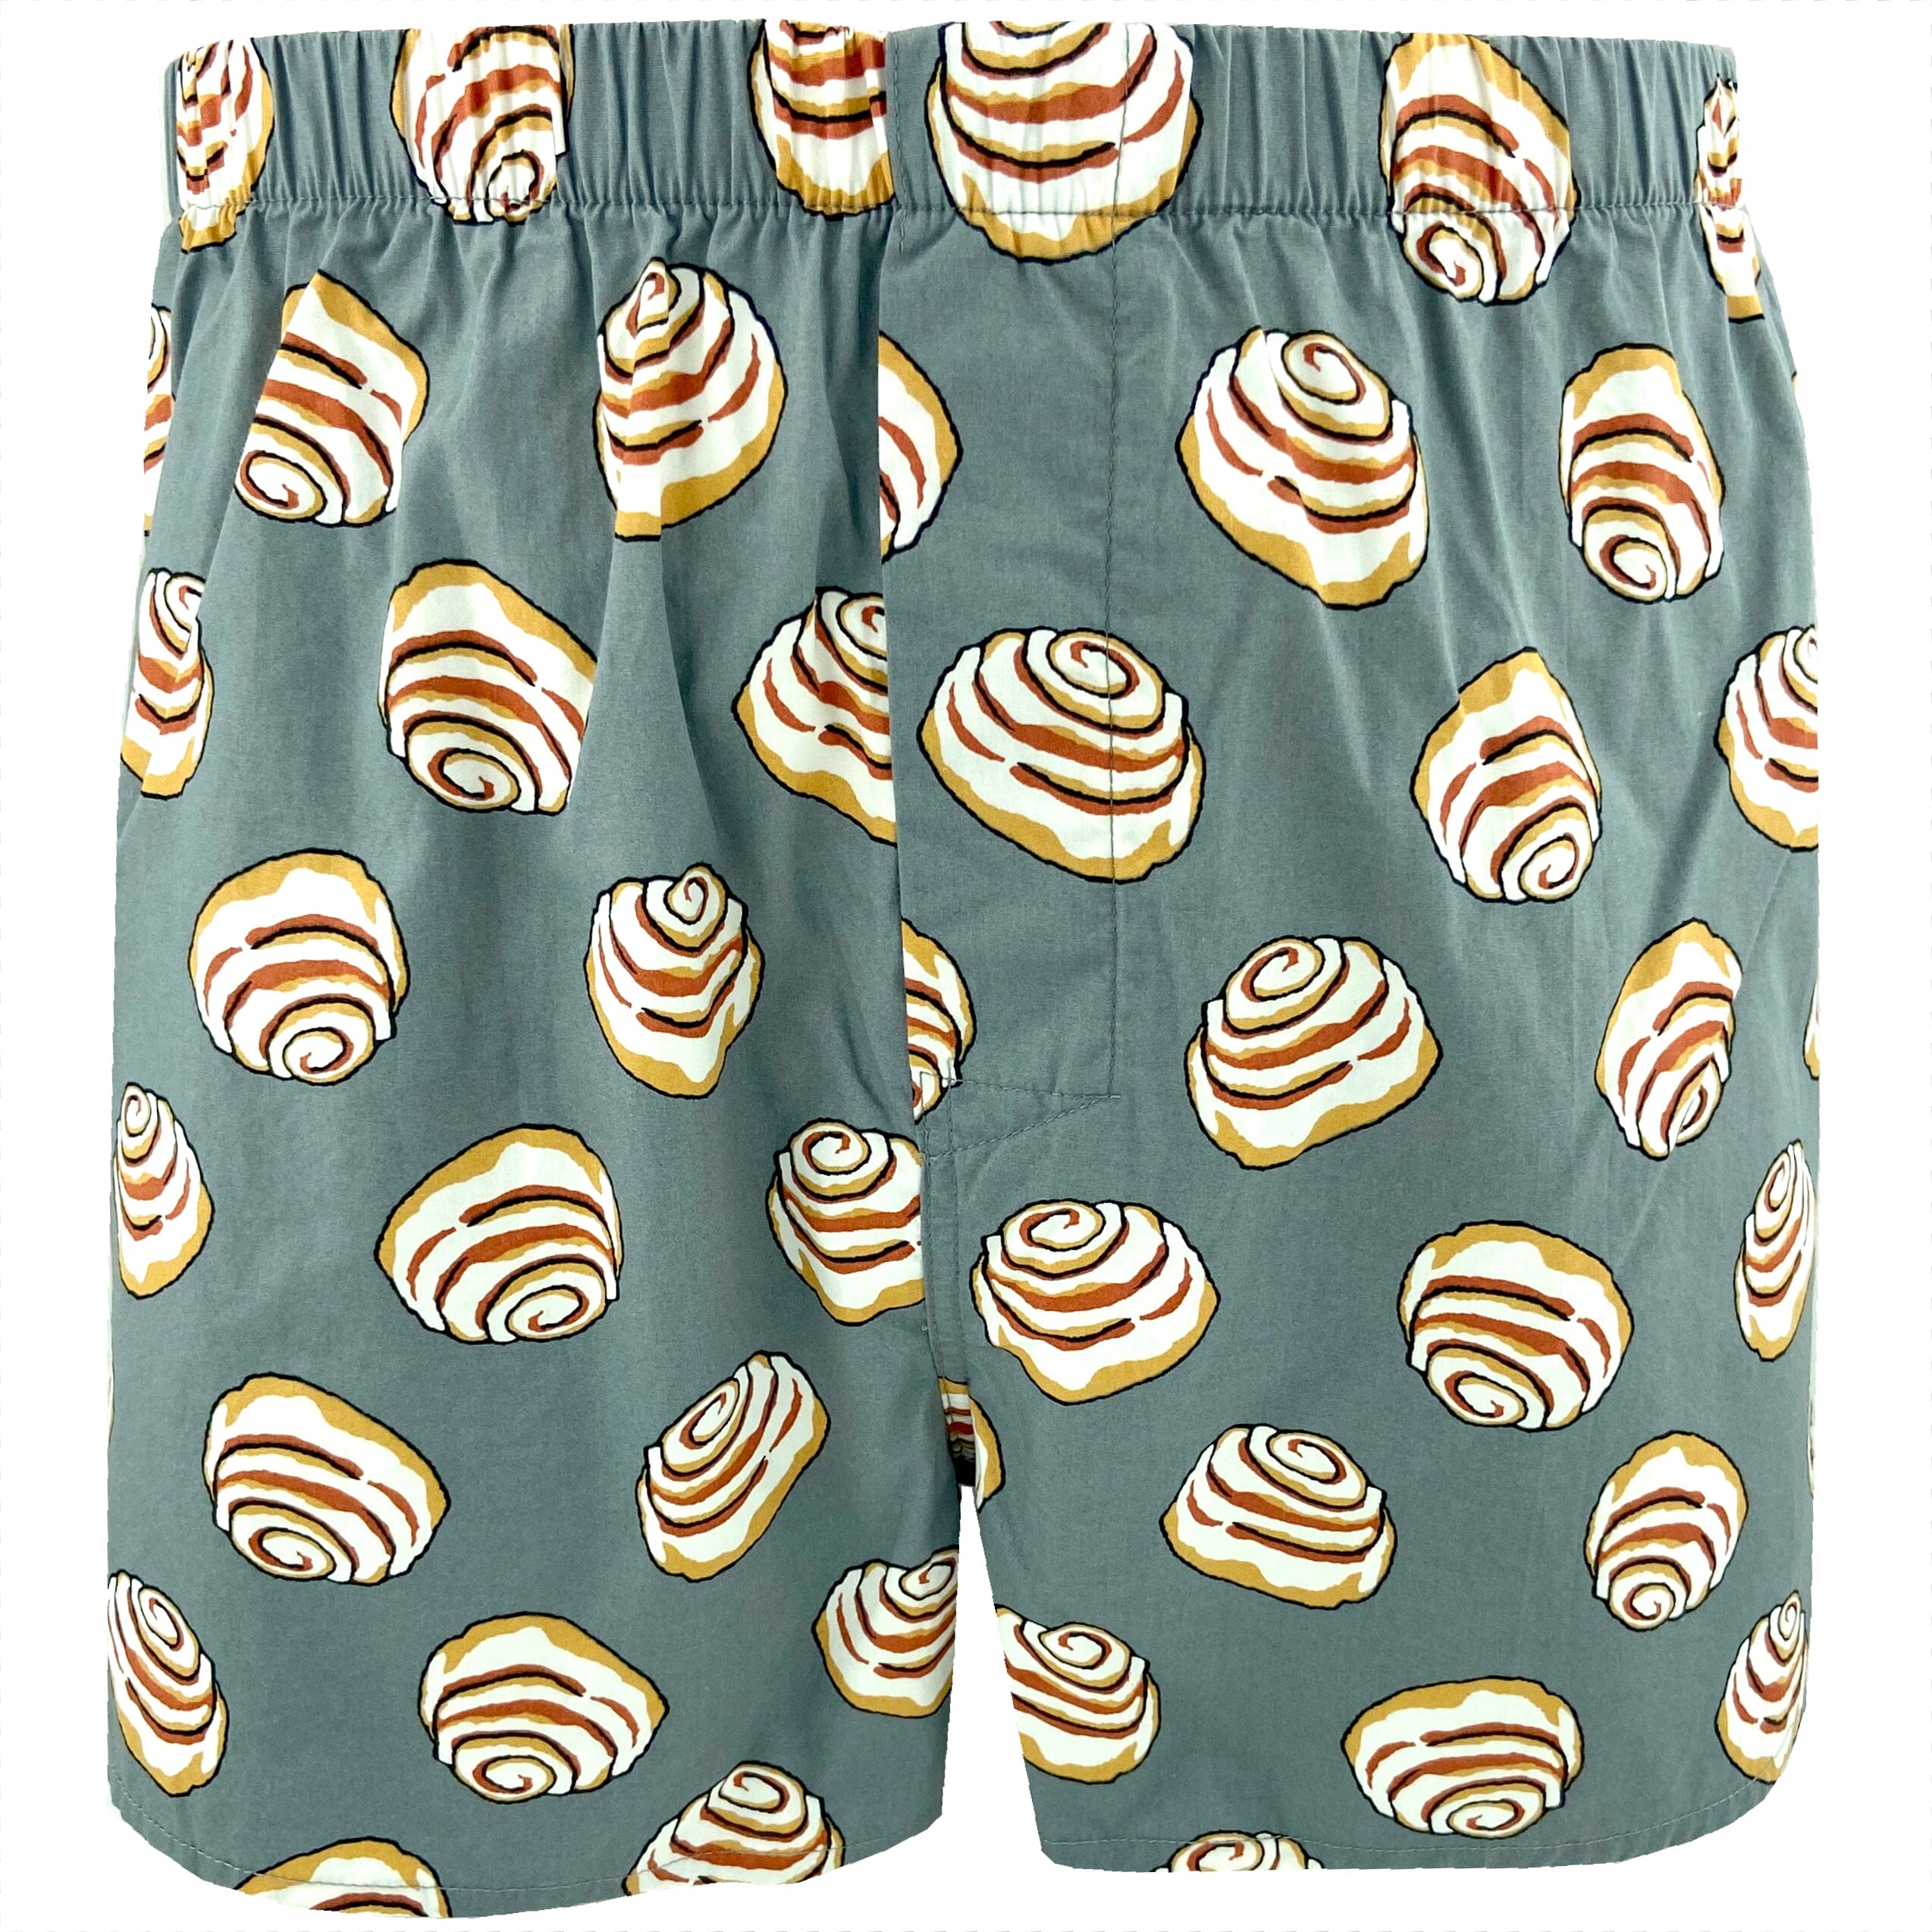 Buy Men's Food Themed Cinnamon Roll Patterned Soft Cotton Boxer Shorts